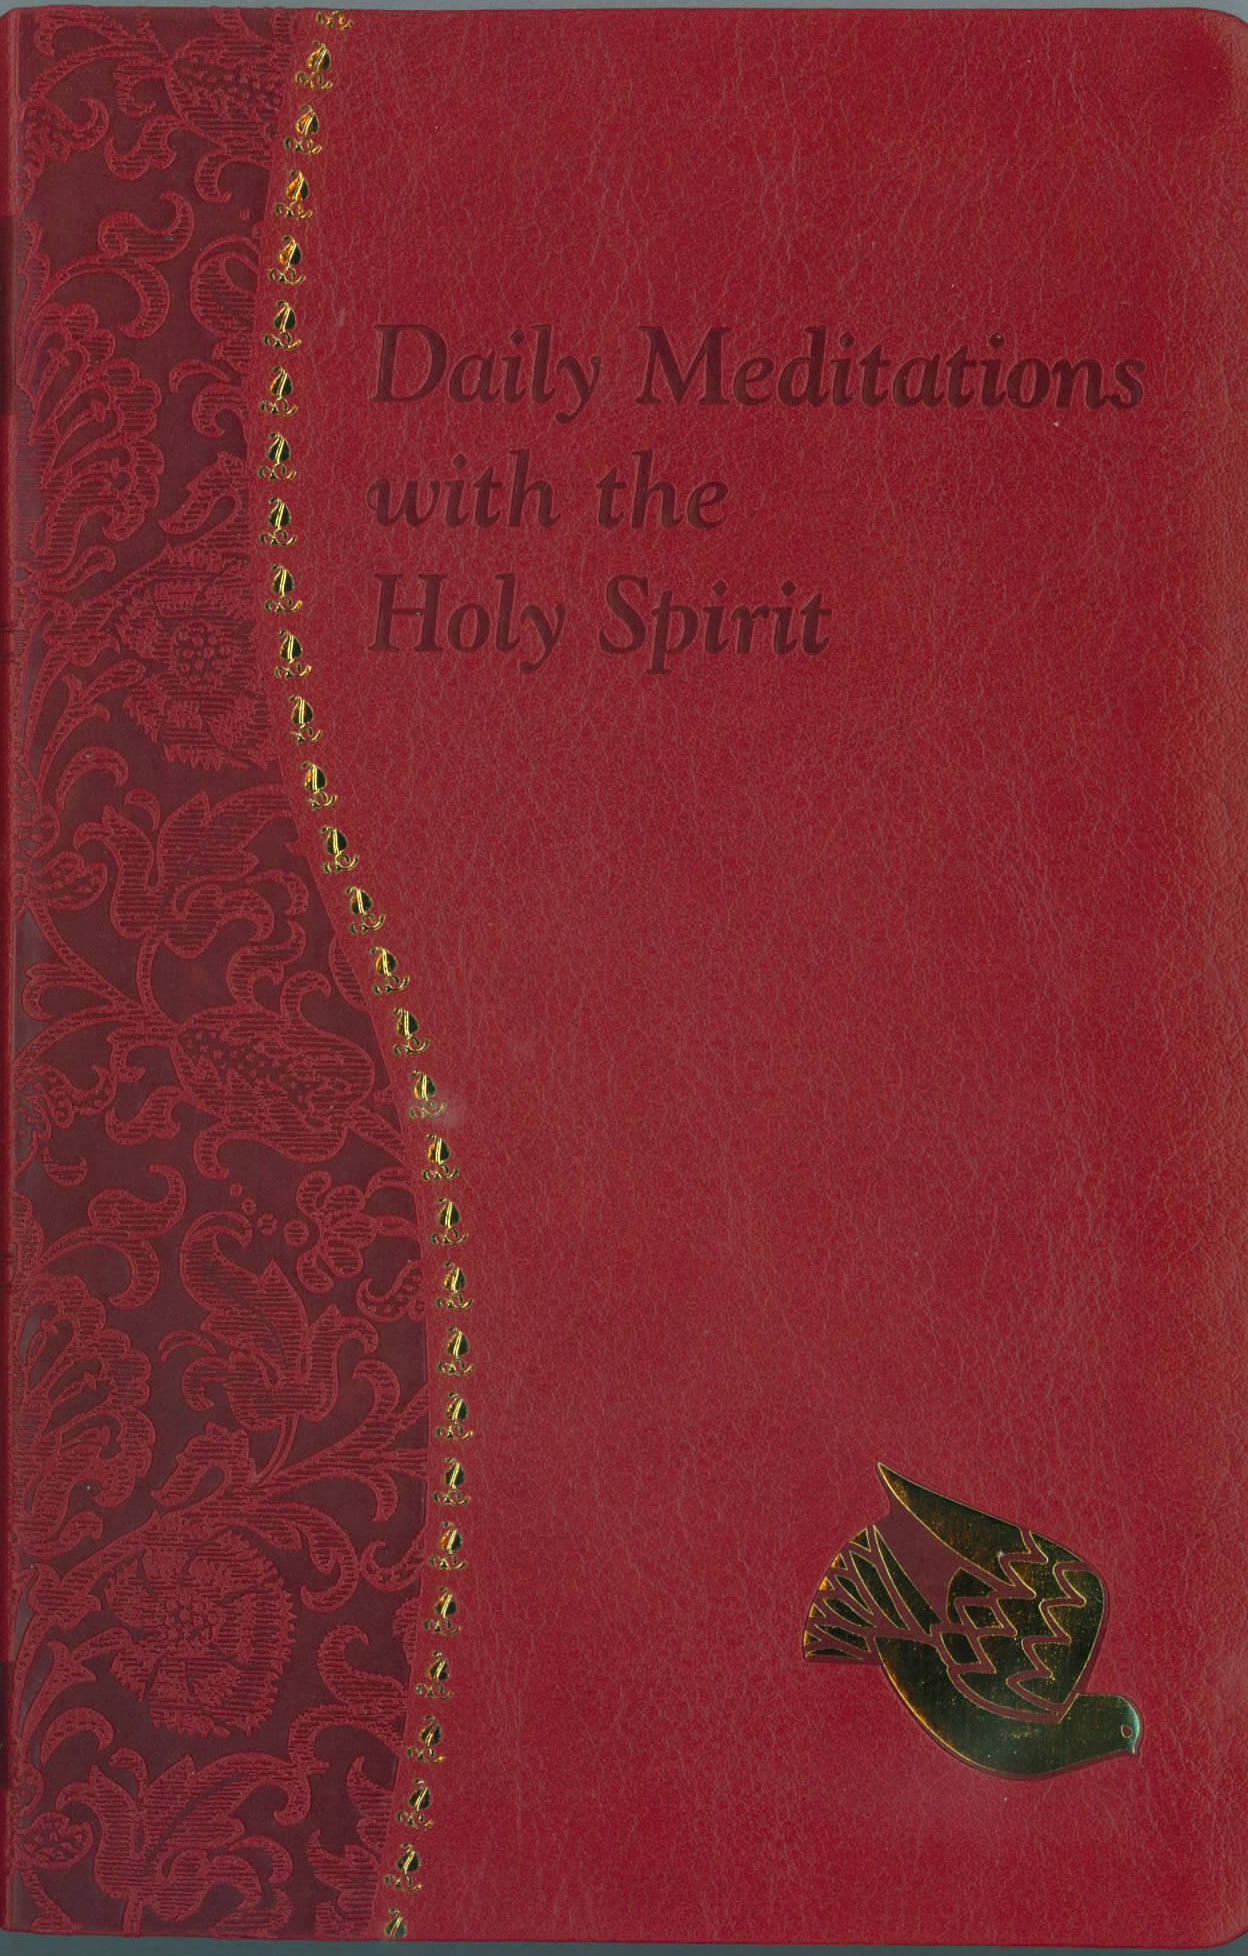 Daily Meditations with the Holy Spirit by Rev. Jude Winkler  60-198/19